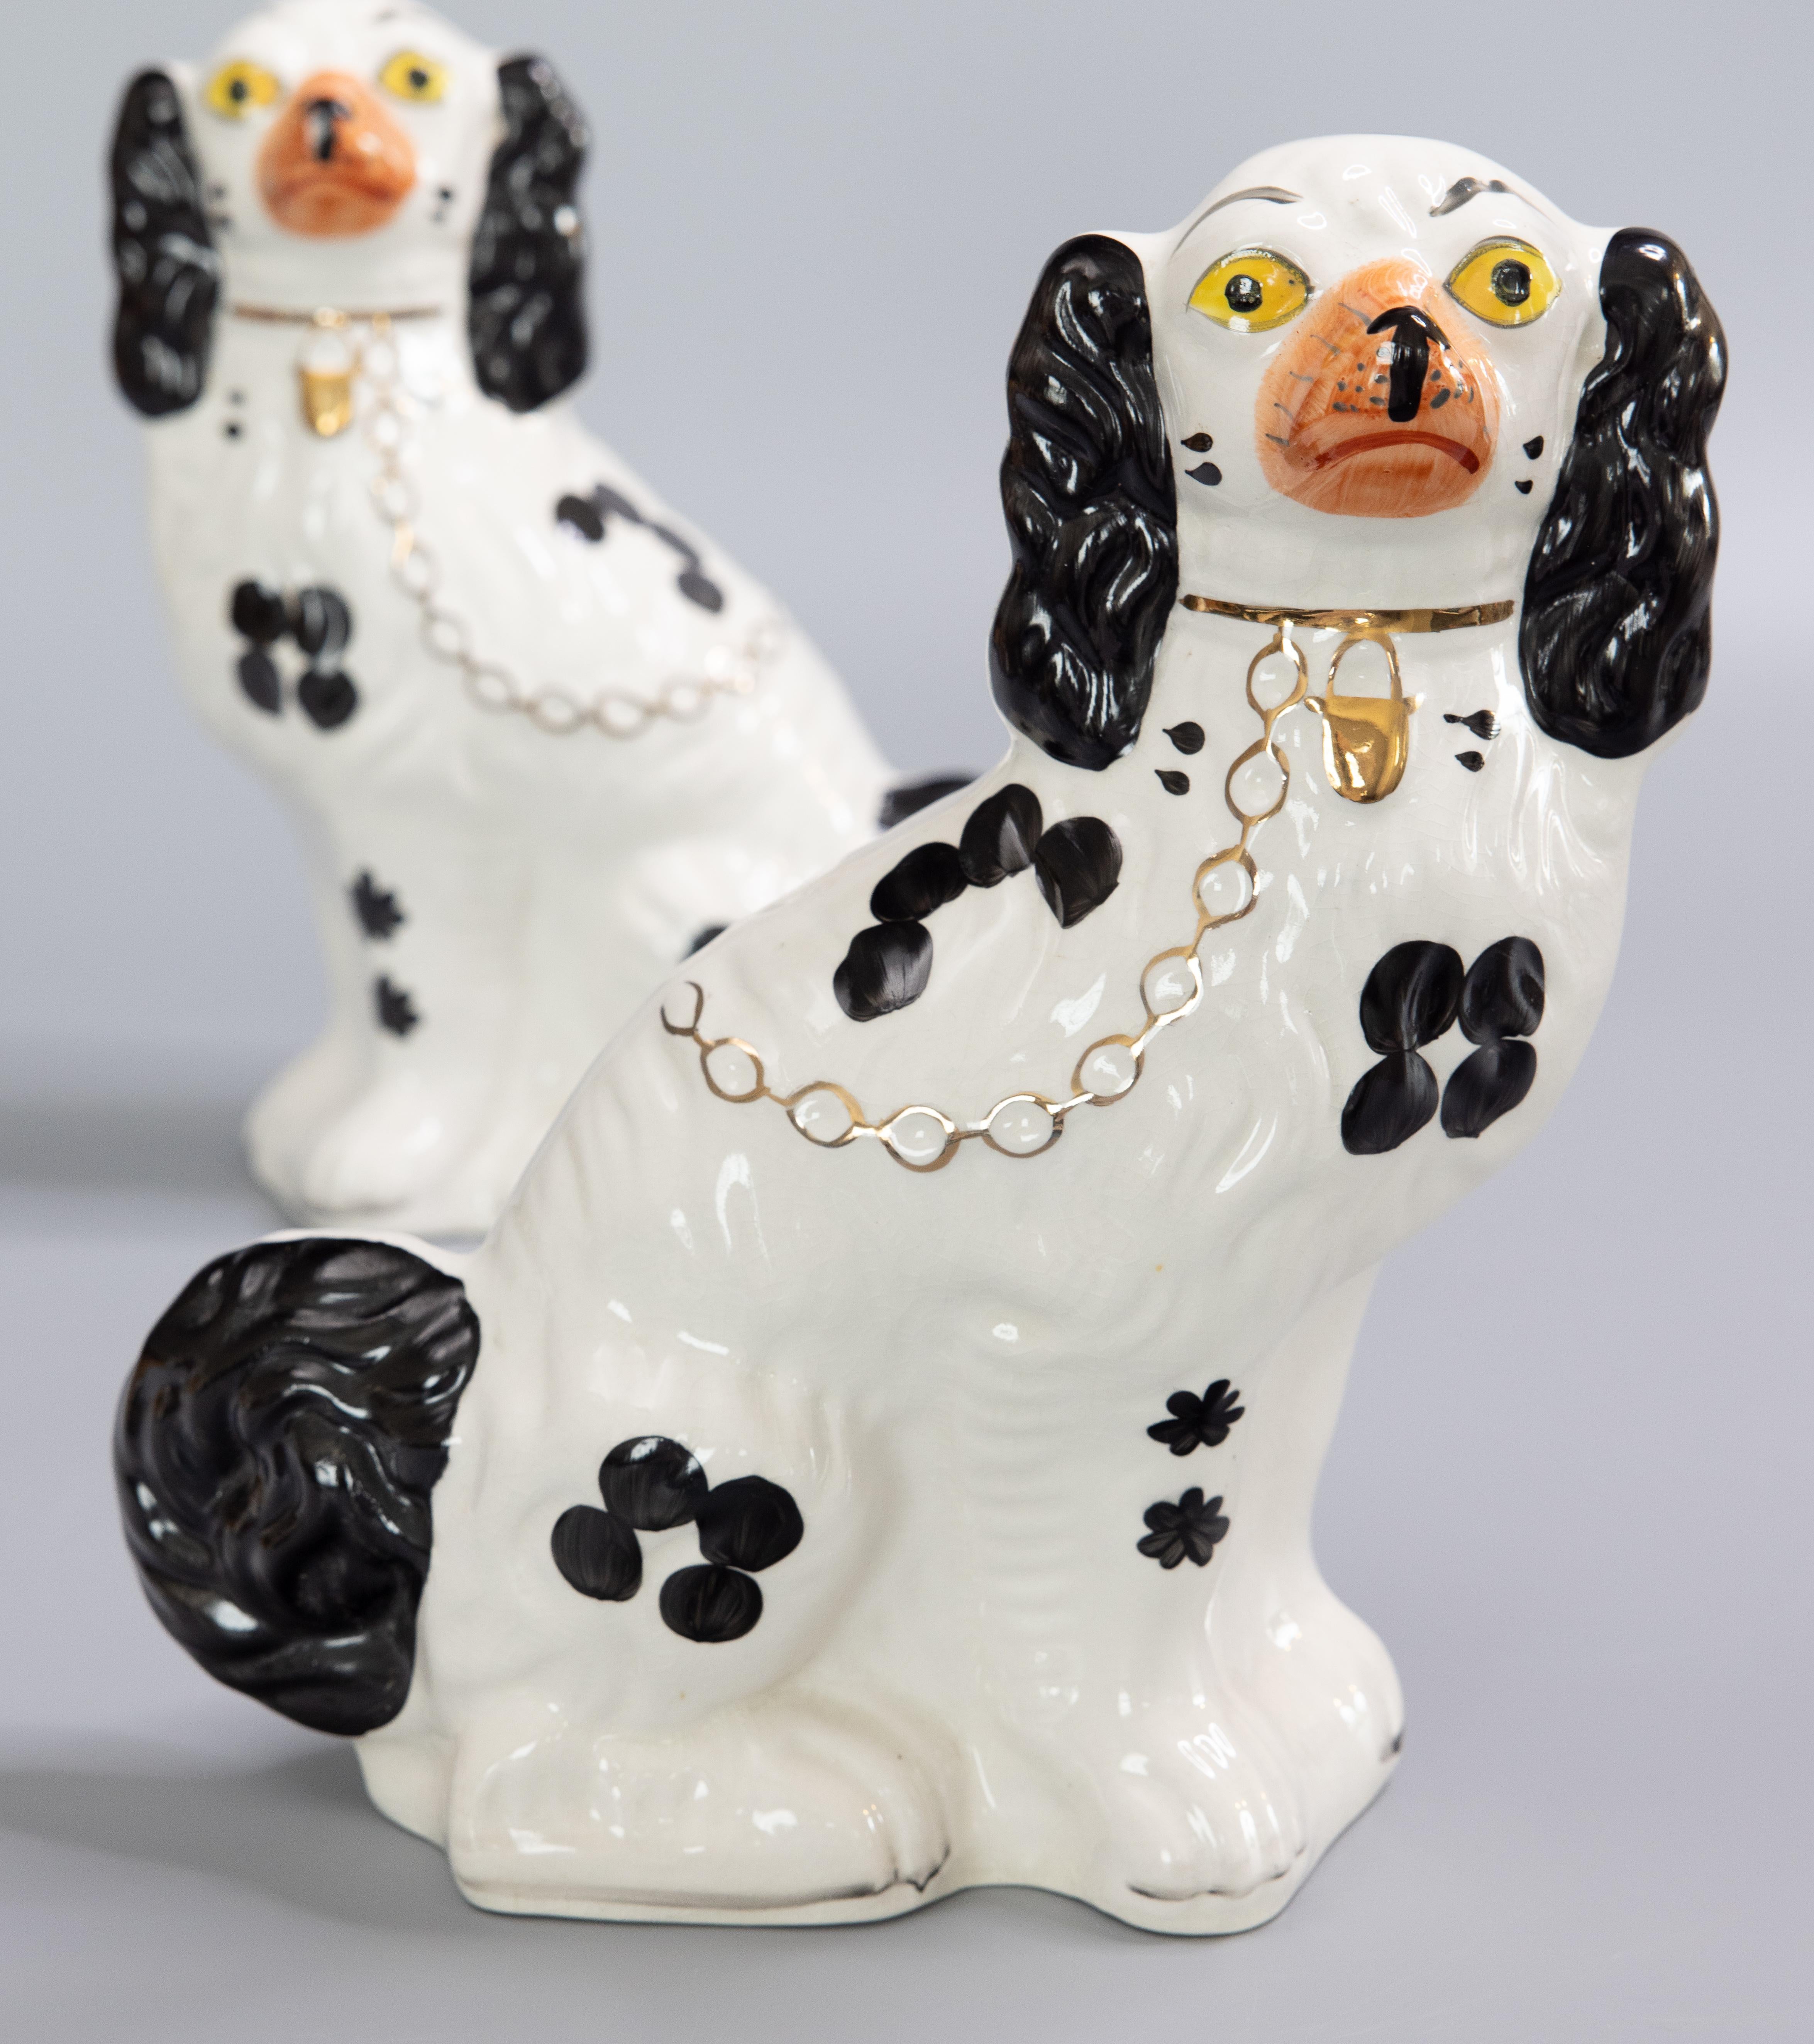 A fine pair of early 20th century English Staffordshire black and white spaniel dog figurines. These hand painted dogs have gorgeous gilt details, sweet faces, and are a nice large Size. These charming fellows would be a wonderful addition to a